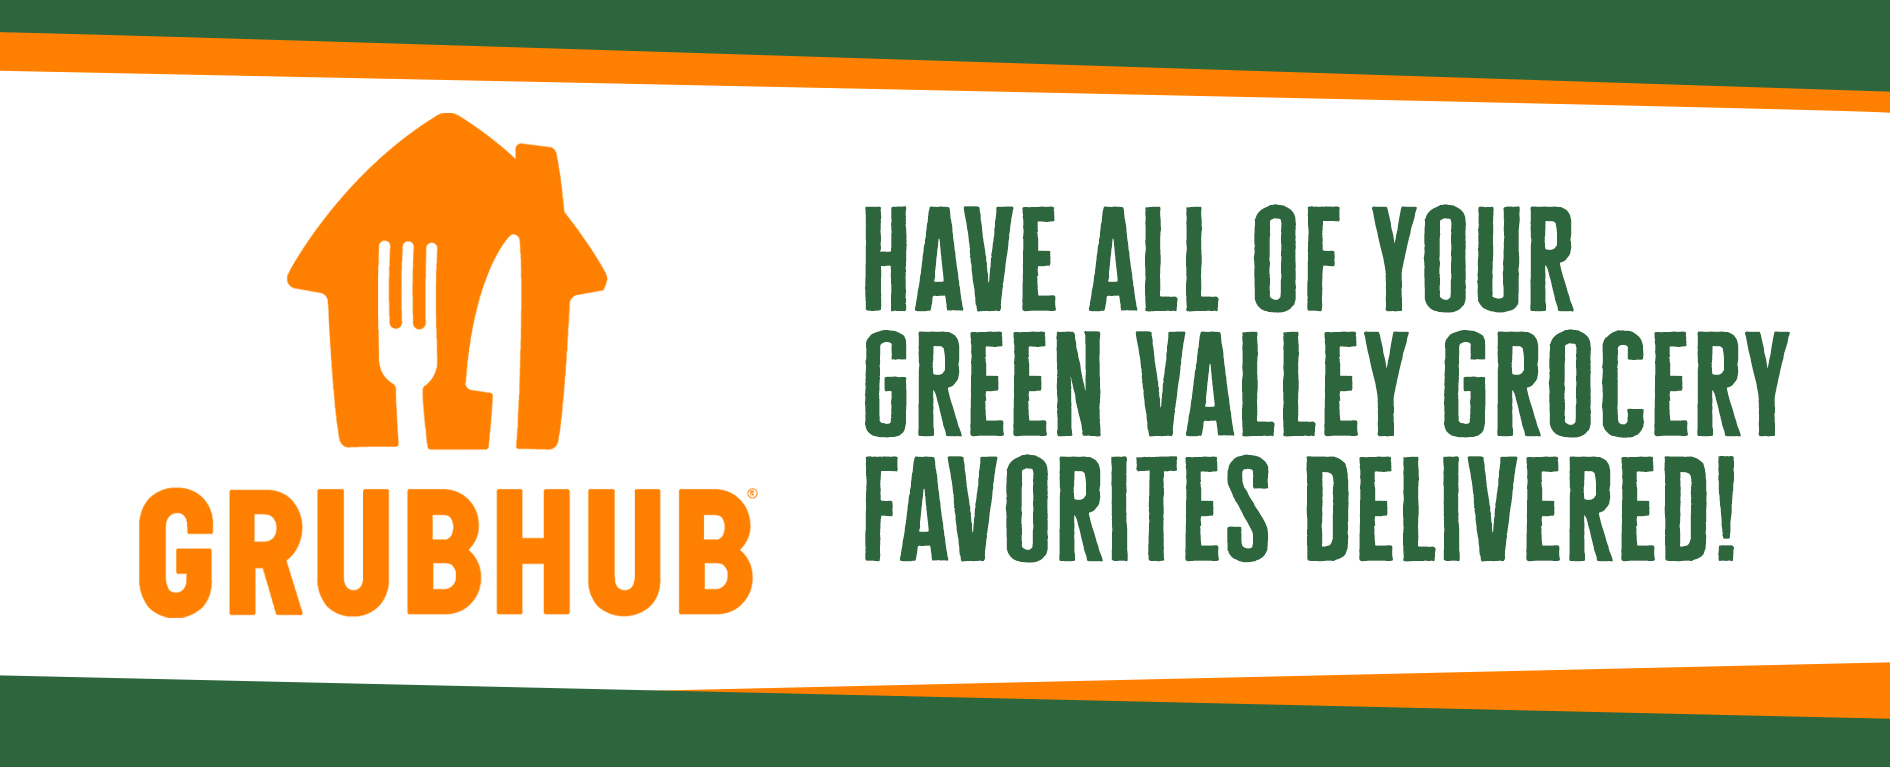 Grubhub, have all of your Green Valley Grocery Favorites Delivered!